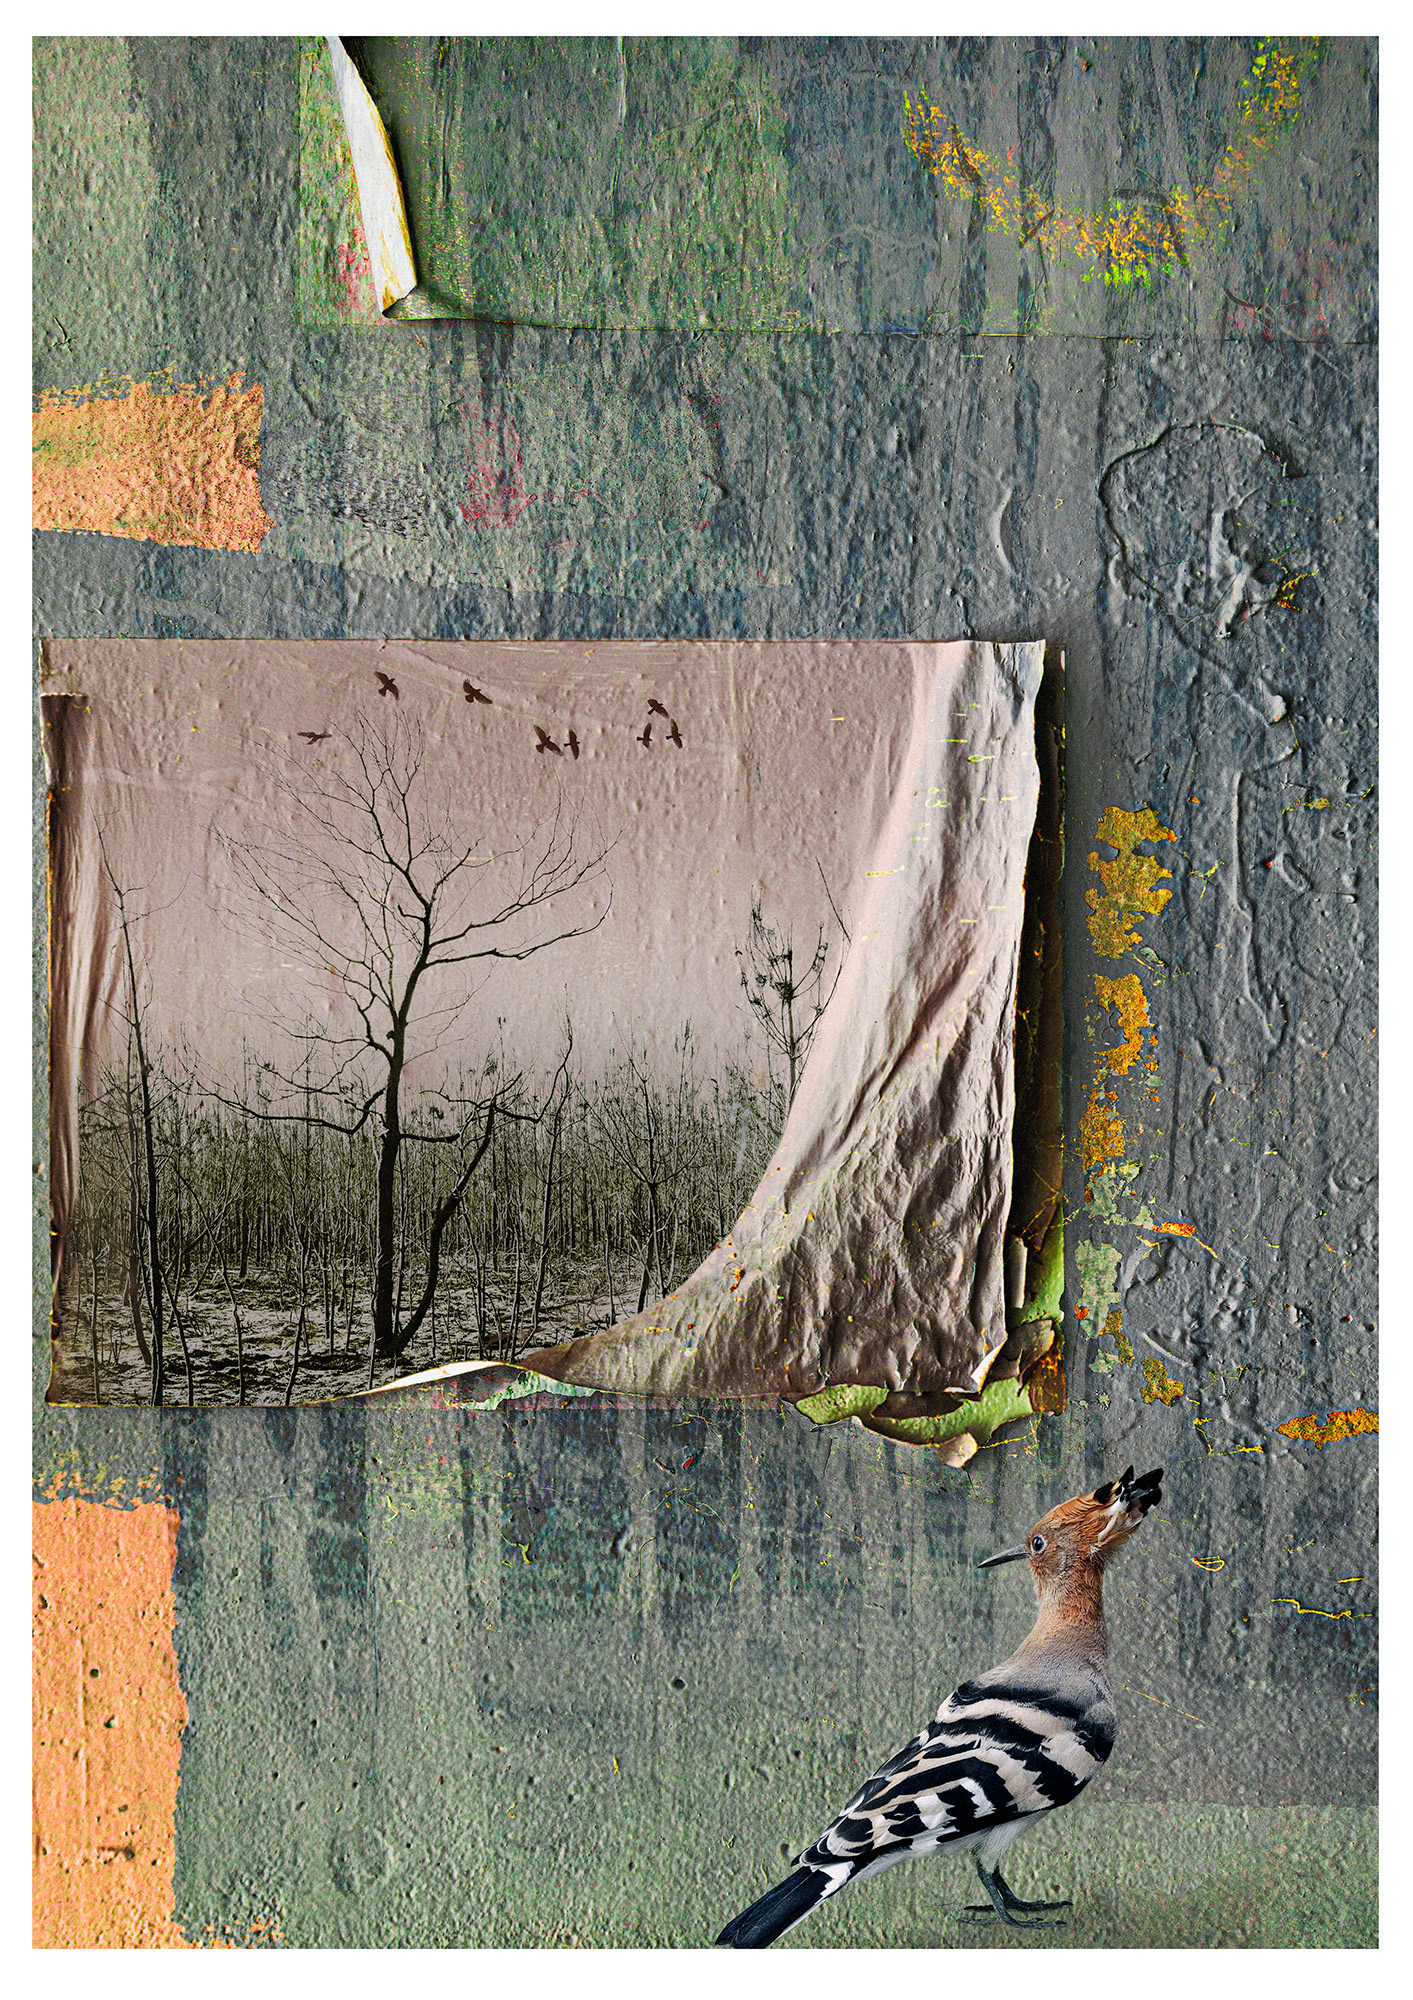 Composite photograph of textured wall bottom of image is a Hoopoe Bird looking up at a burnt woodland scene superimposed on a peelimg piece of paper. Where the paper has lifted it resembles a tree trunk